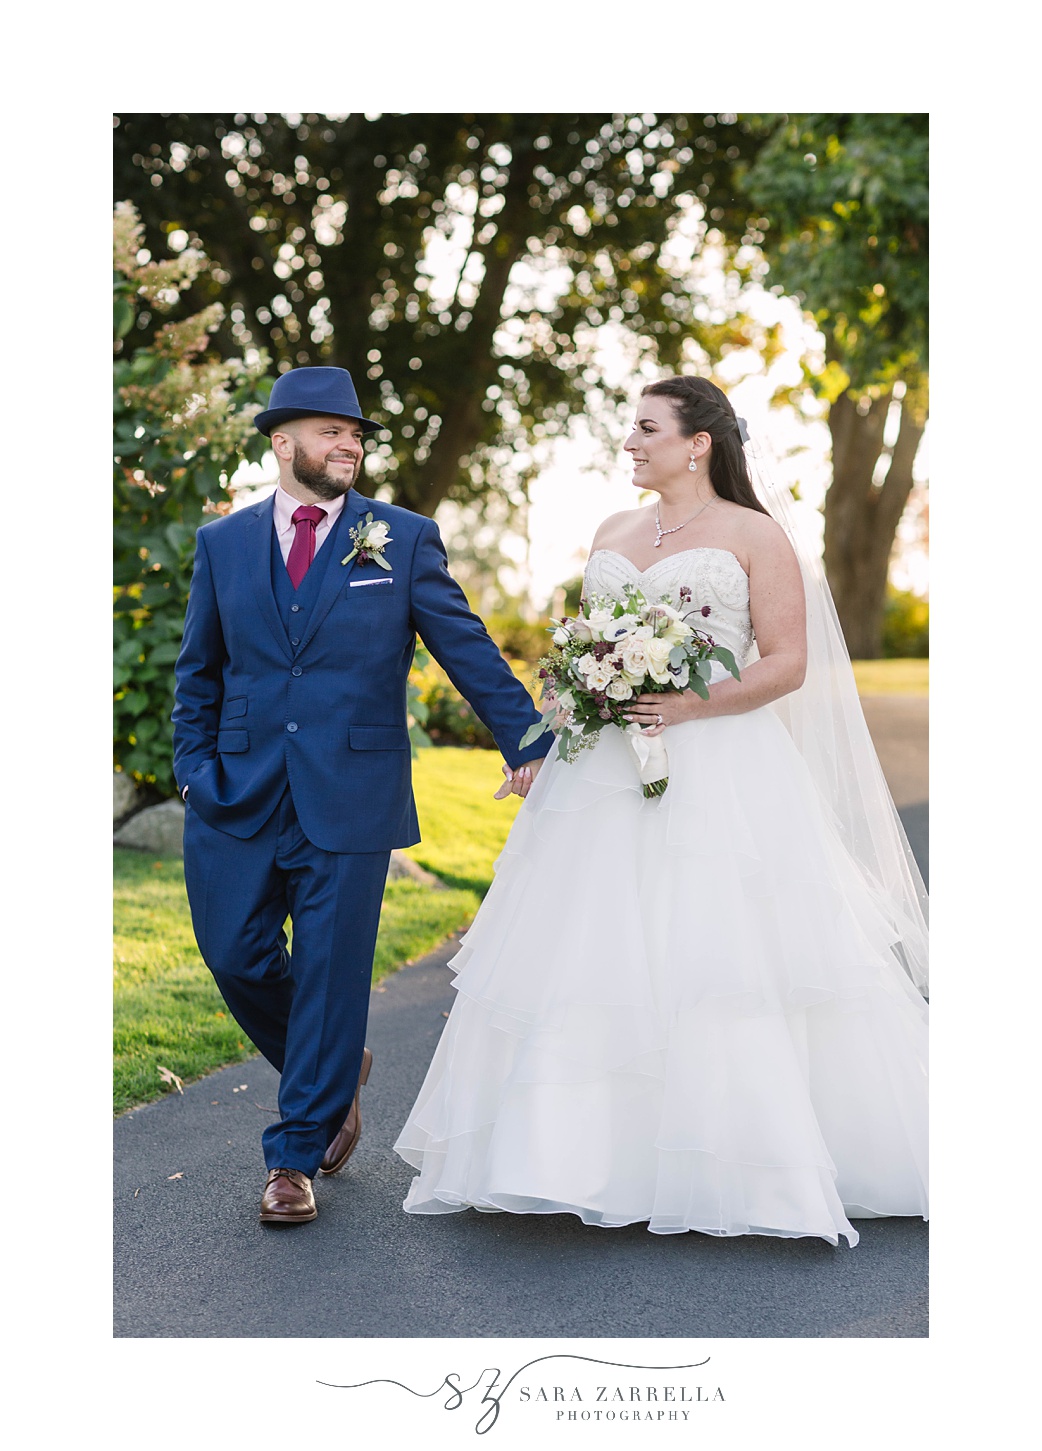 newlyweds walk after Intimate Kirkbrae Country Club Wedding ceremony